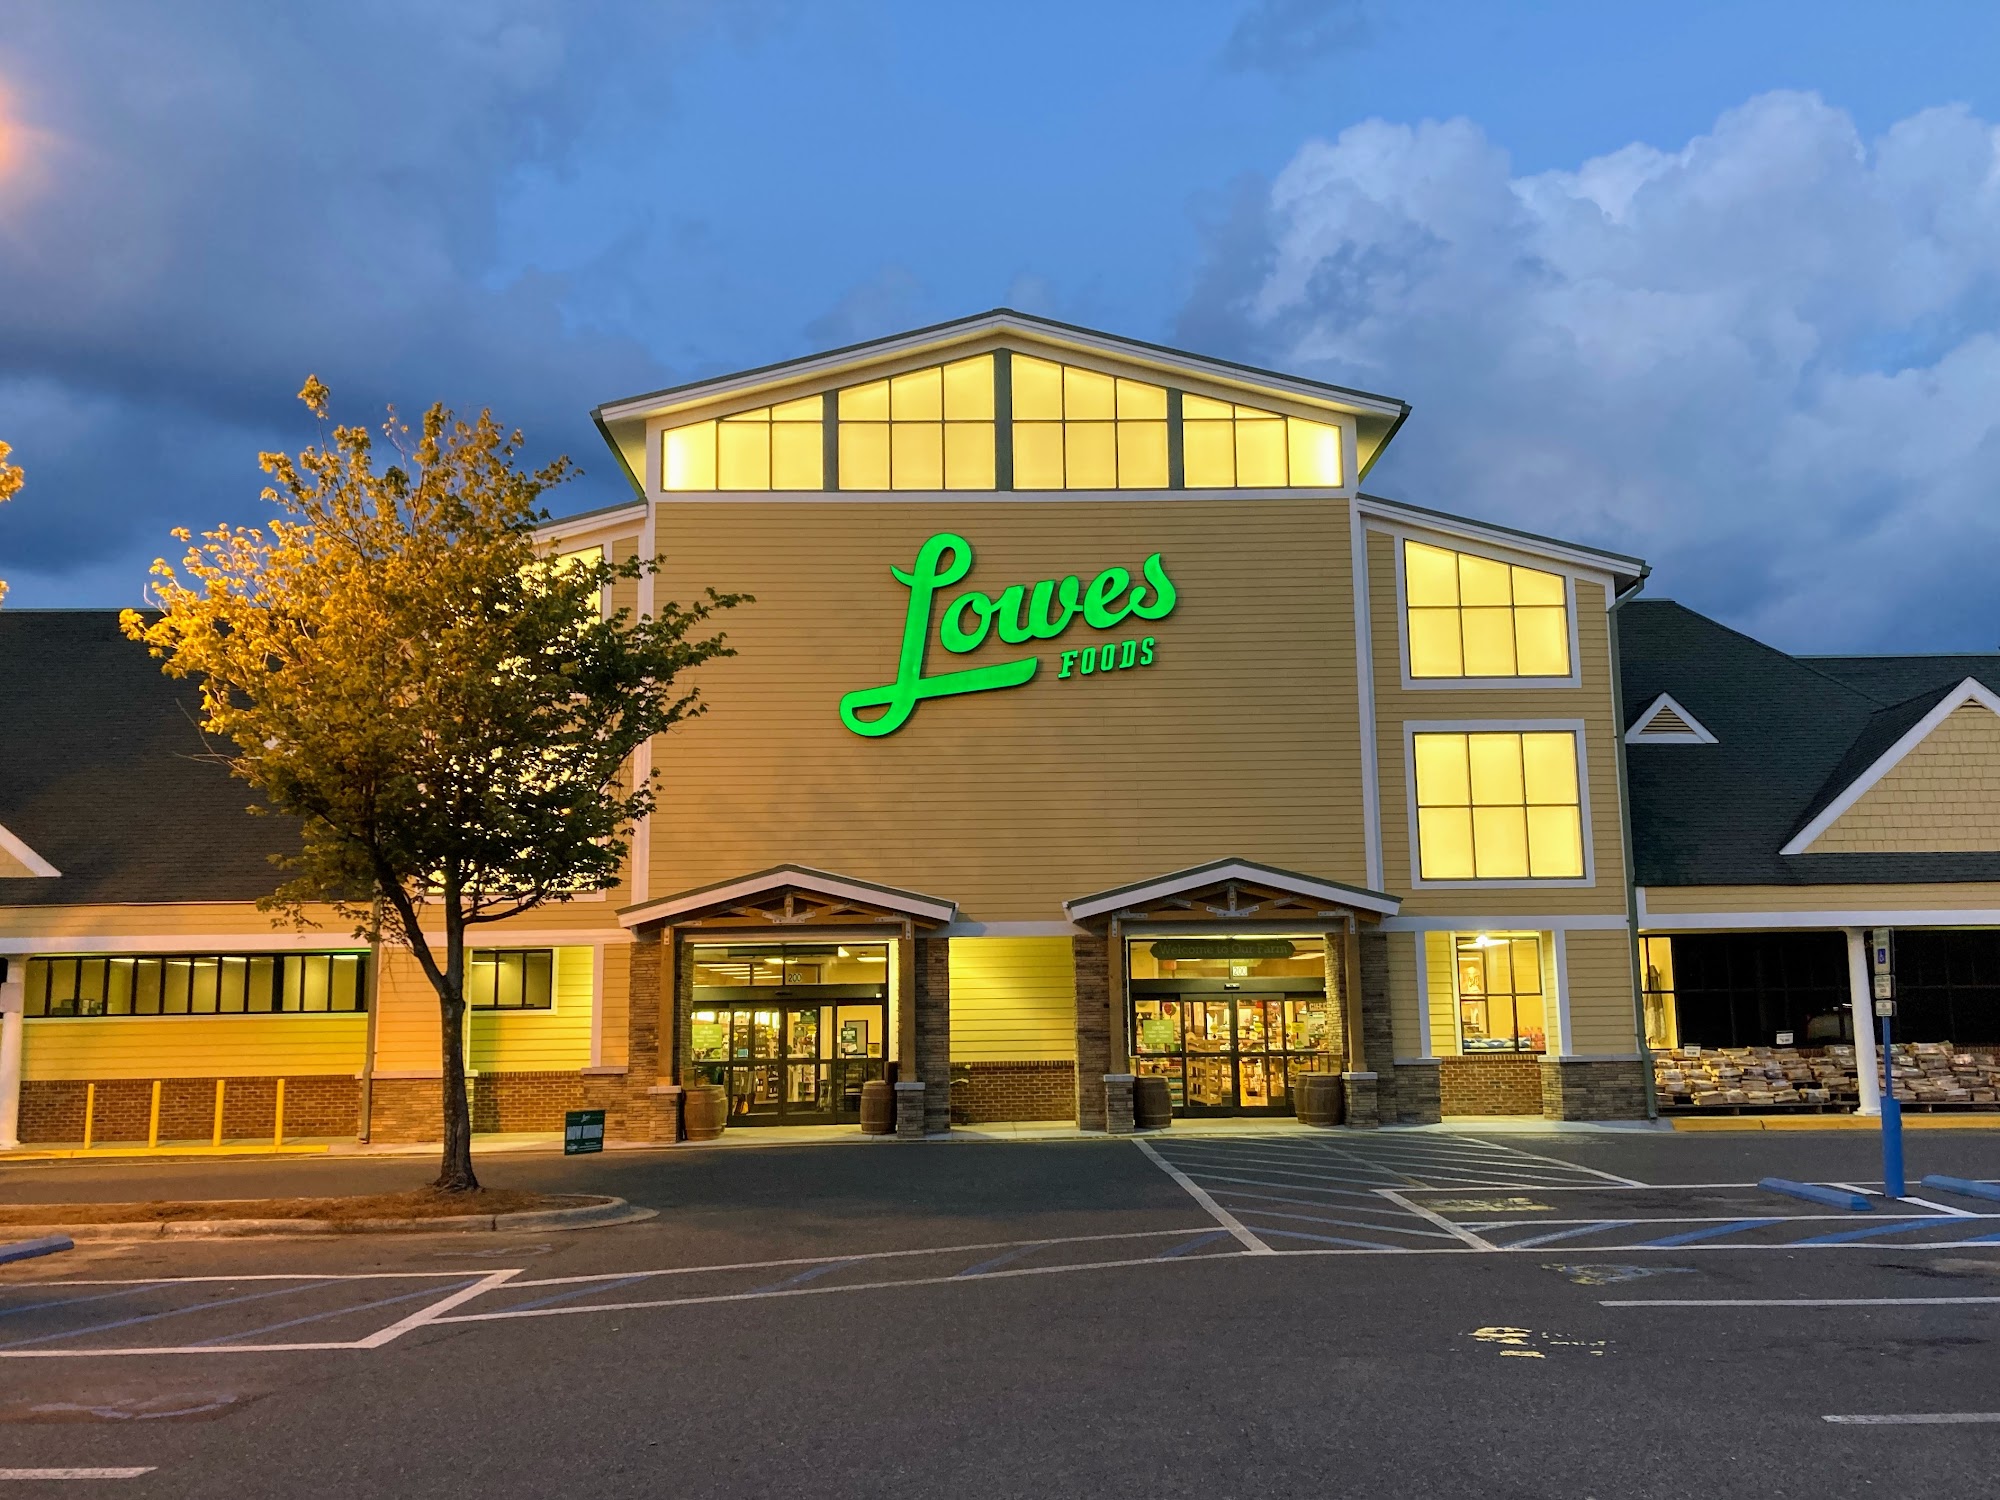 Lowes Foods of Chapel Hill